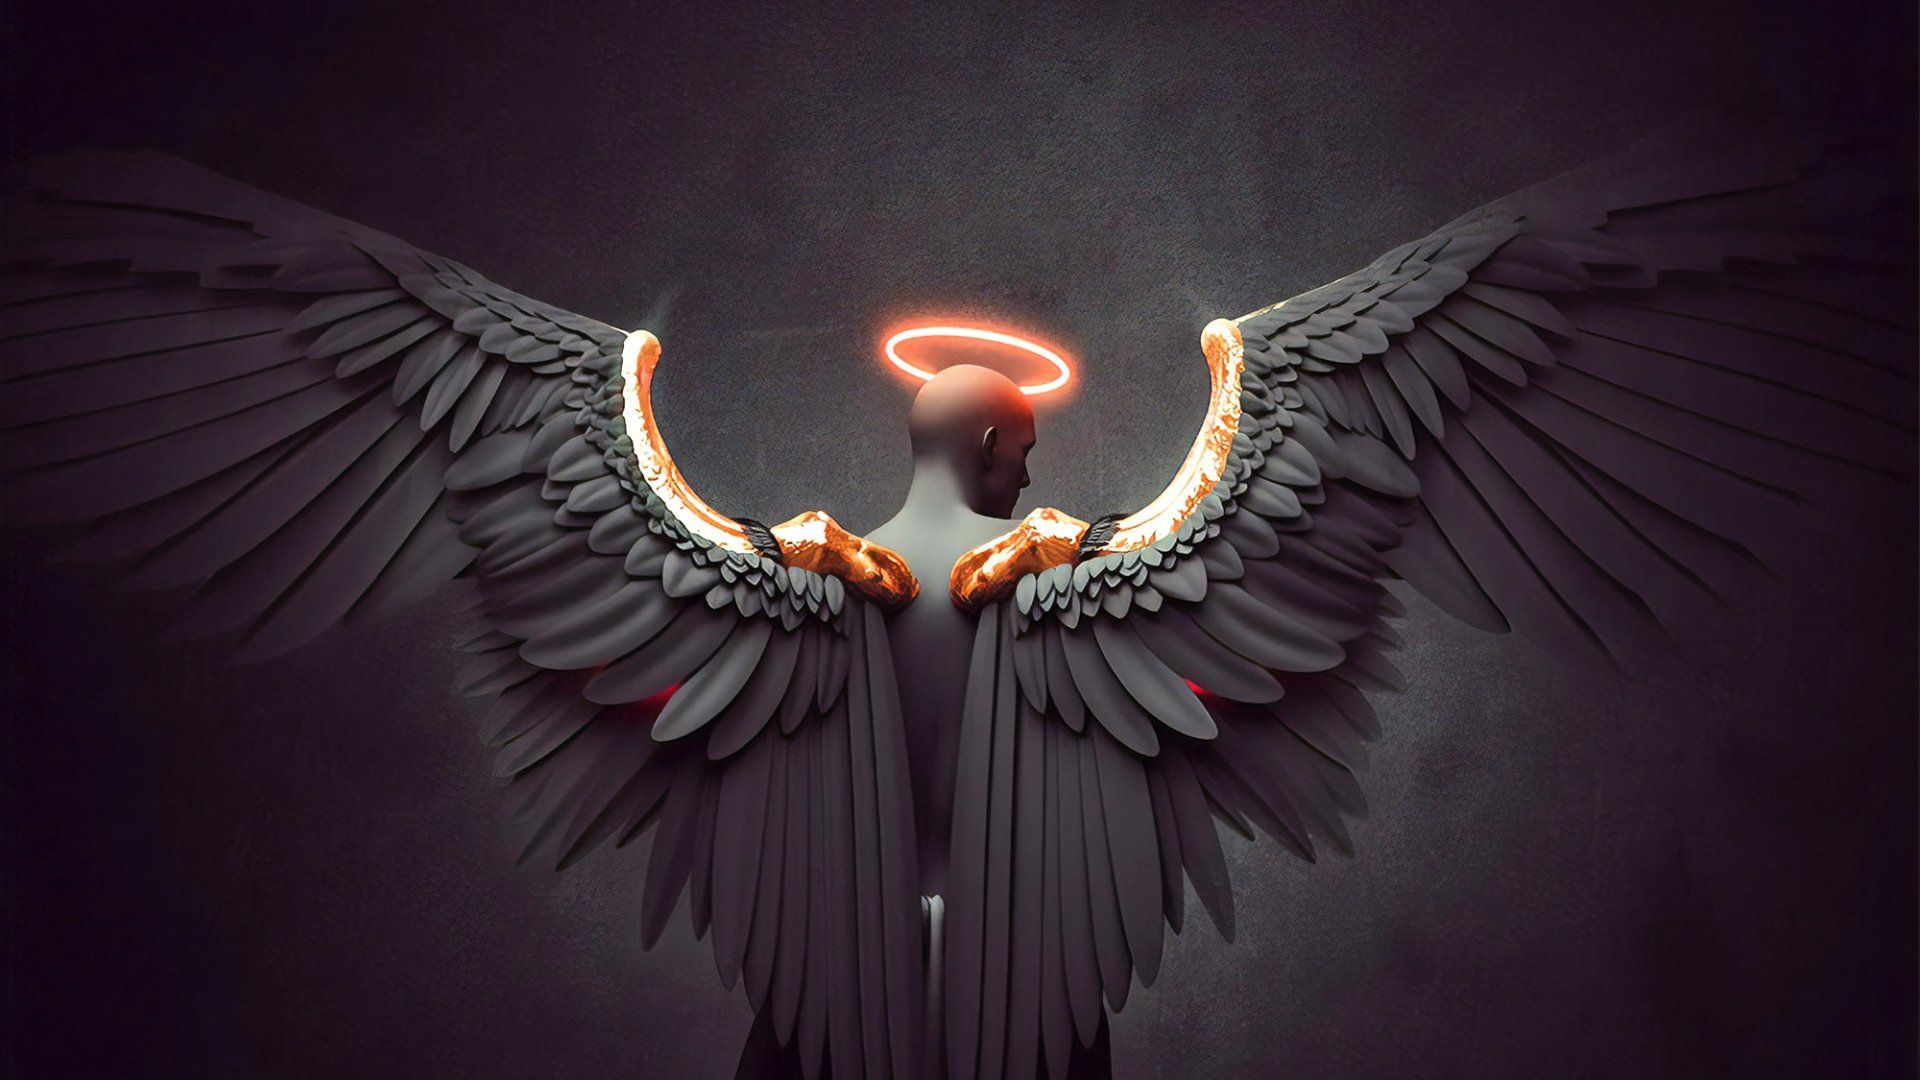 A black angel with wings and red light - Wings